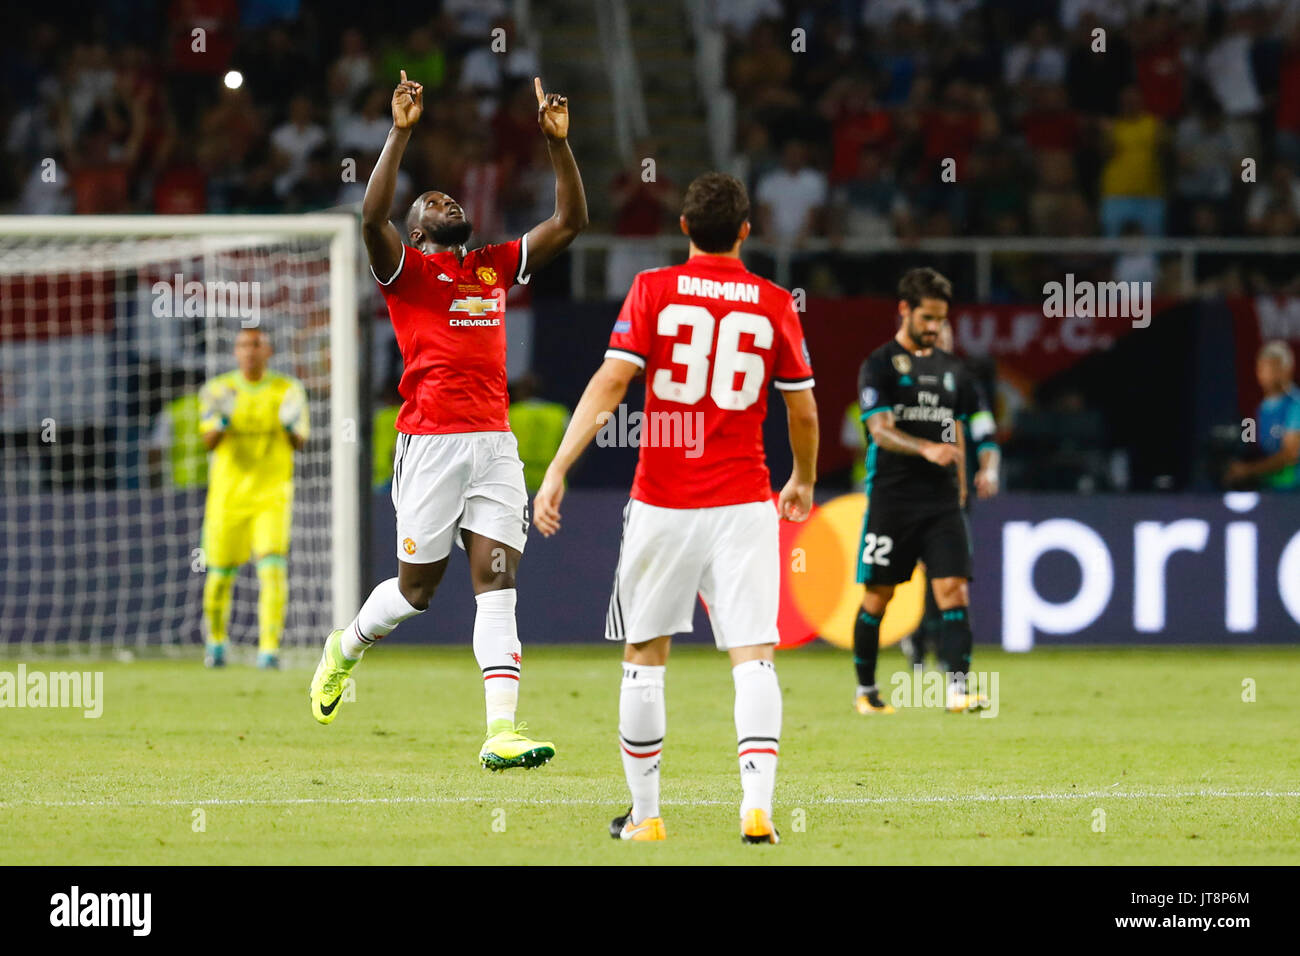 Skopje, Macedonia. 8th Aug, 2017. Romelu Lukaku (9) Manchester United's player celebrates the (1, 1) after scoring his team´s goal. UEFA SUPER CUP FINAL between Real Madrid vs Manchester United match at the Philipo II National Arena (Skopje) Macedonia, August 8, 2017 . Credit: Gtres Información más Comuniación on line, S.L./Alamy Live News Stock Photo